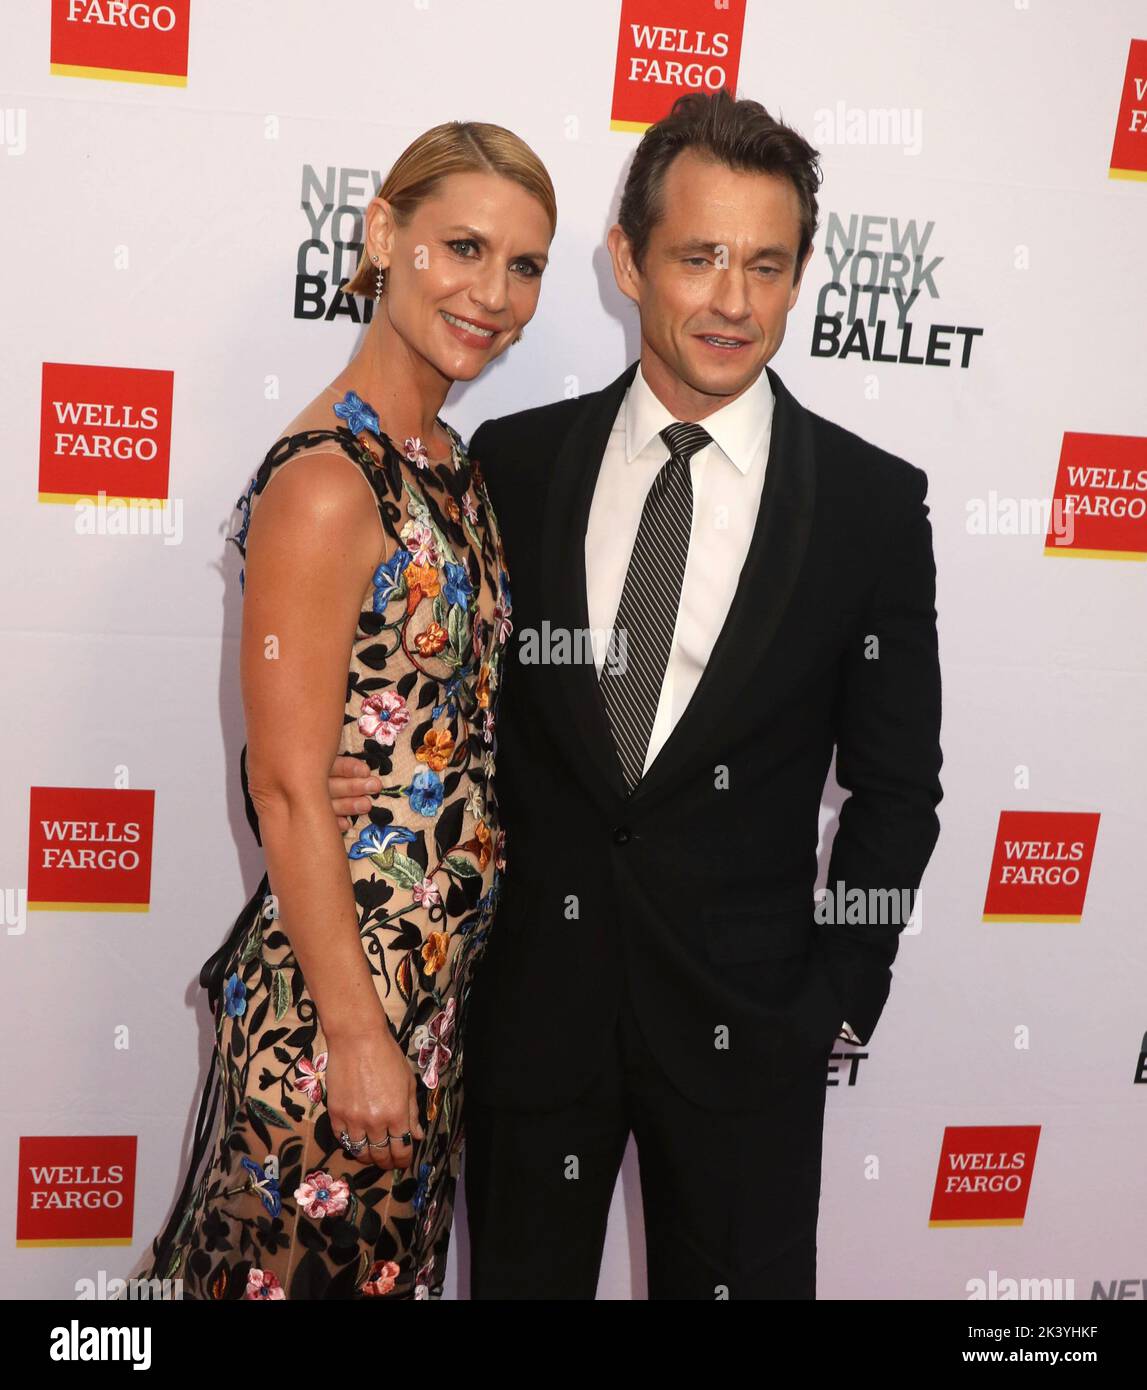 September 28, 2022, New York City, New York, USA: Actress CLAIRE DANES and HUGH DANCY attend the New York City Ballet 2022 Fall Fashion Gala held at the David H. Koch Theater at Lincoln Center. (Credit Image: © Nancy Kaszerman/ZUMA Press Wire) Stock Photo